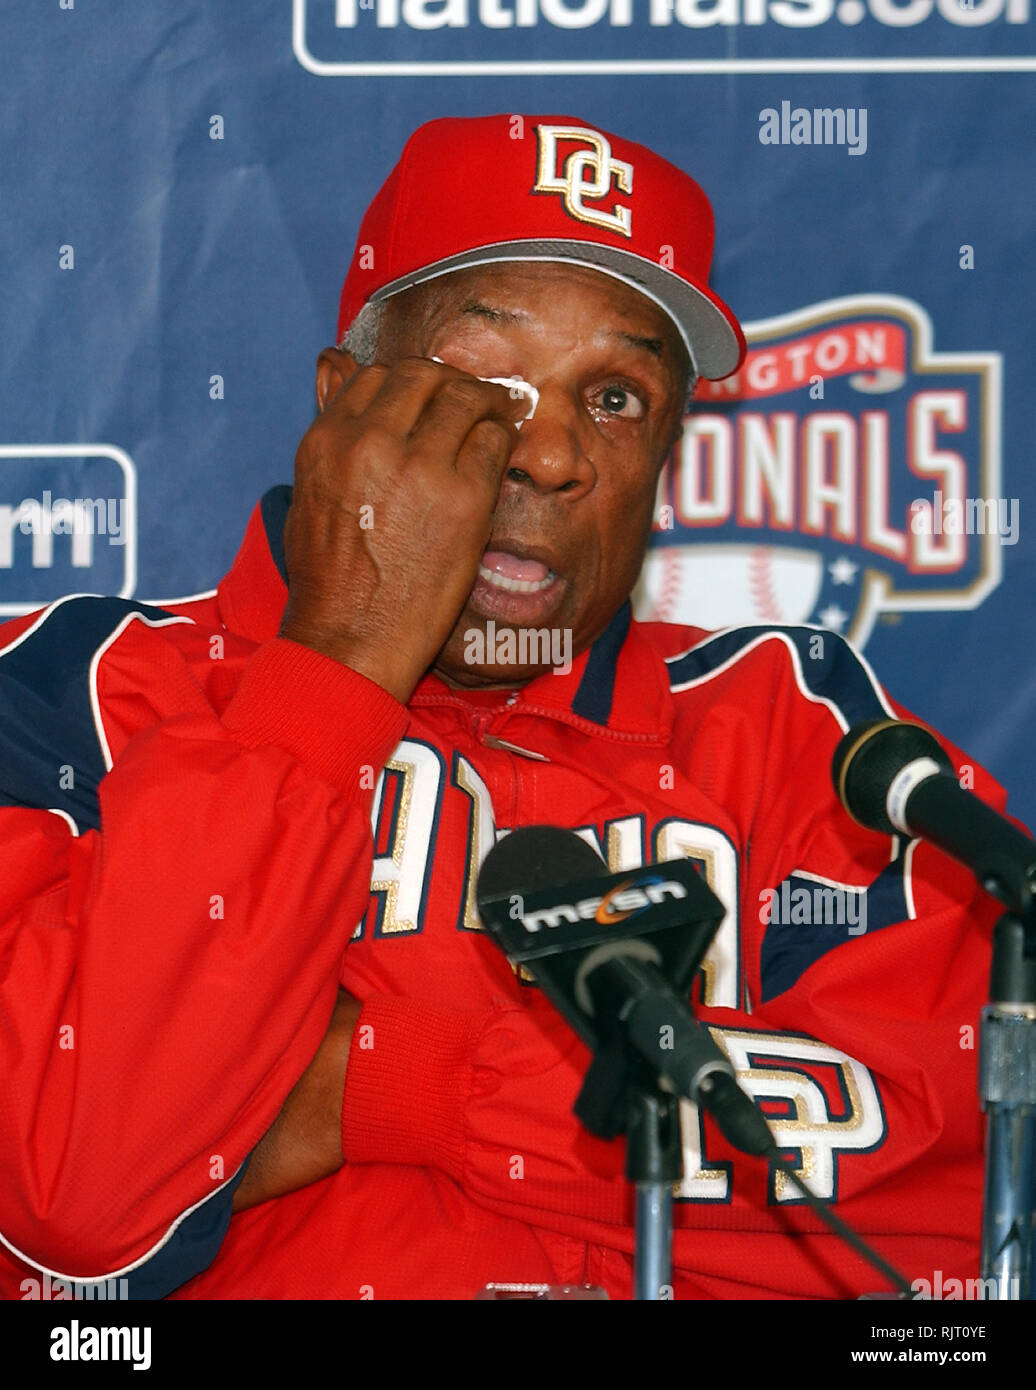 October 1, 2006 - Washington, District of Columbia, U.S. - Washington, D.C. - October 1, 2006 -- Washington Nationals manager Frank Robinson wipes a tear as he discusses his past and future in baseball at his pre-game press conference at RFK Stadium in Washington, D.C. on October 1, 2006.  In his final game as manager, Robinson's Nationals will host the New York Mets. (Credit Image: © Ron Sachs/CNP via ZUMA Wire) Stock Photo